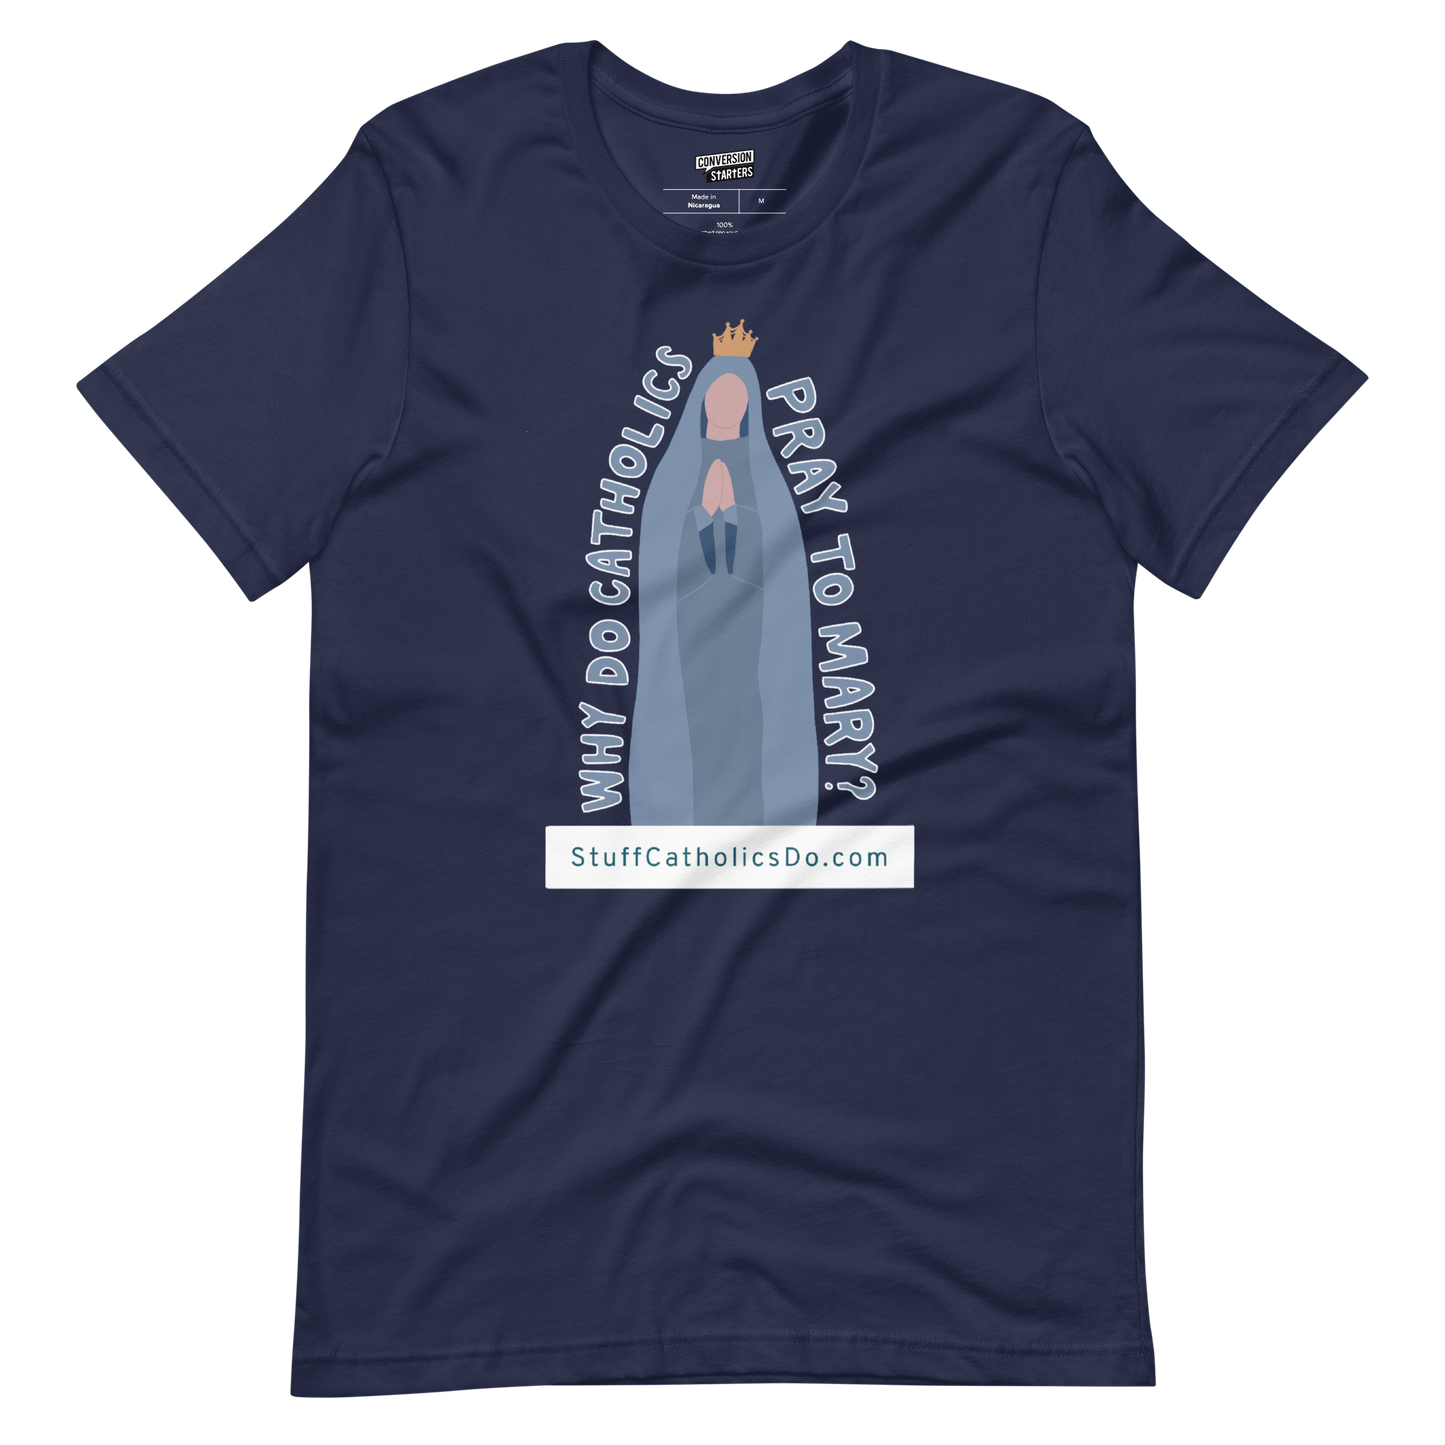 "Why Do Catholics Pray To Mary?" T-shirt - Front and Back